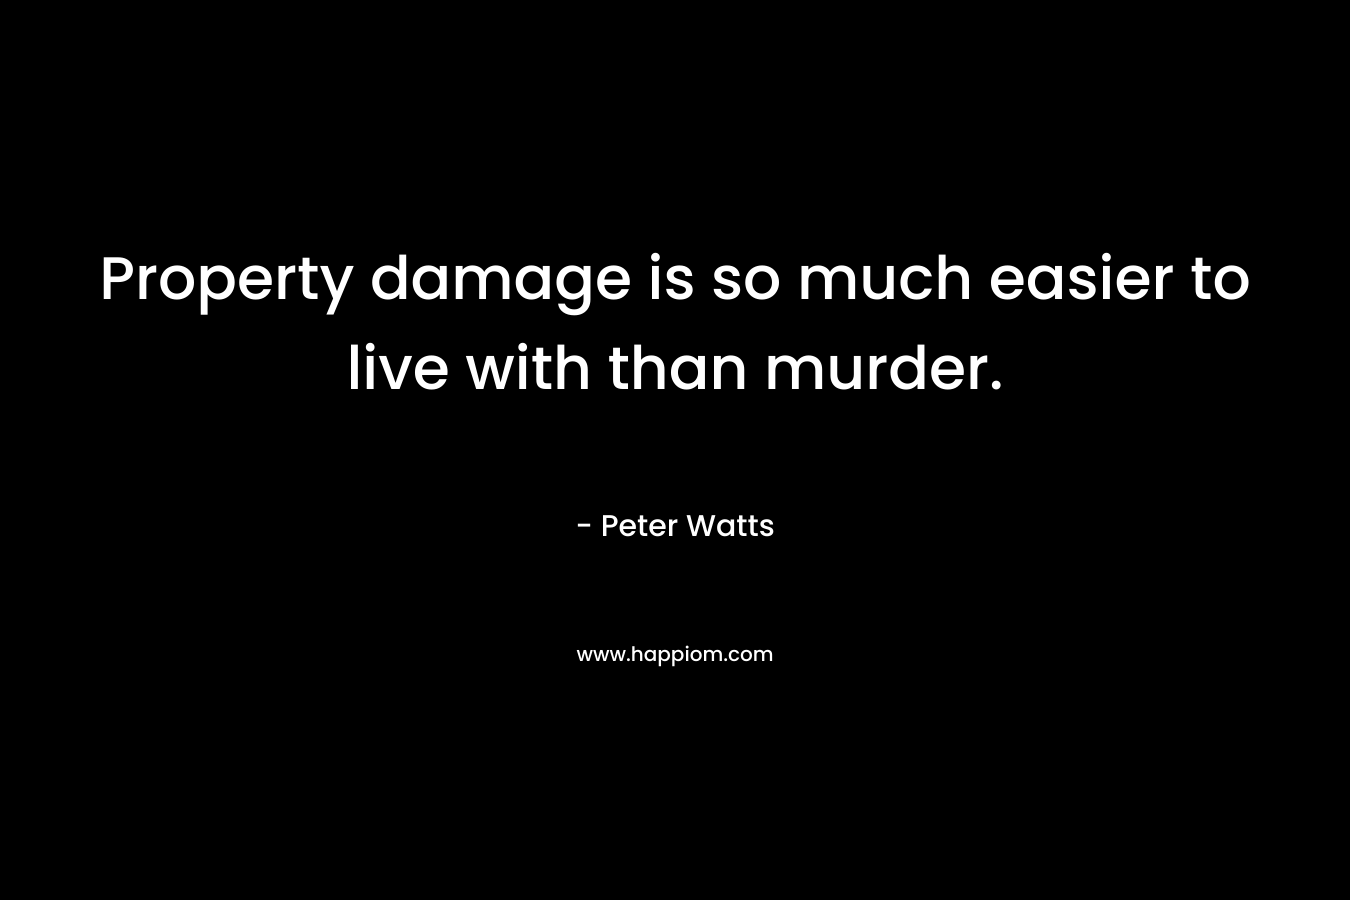 Property damage is so much easier to live with than murder.